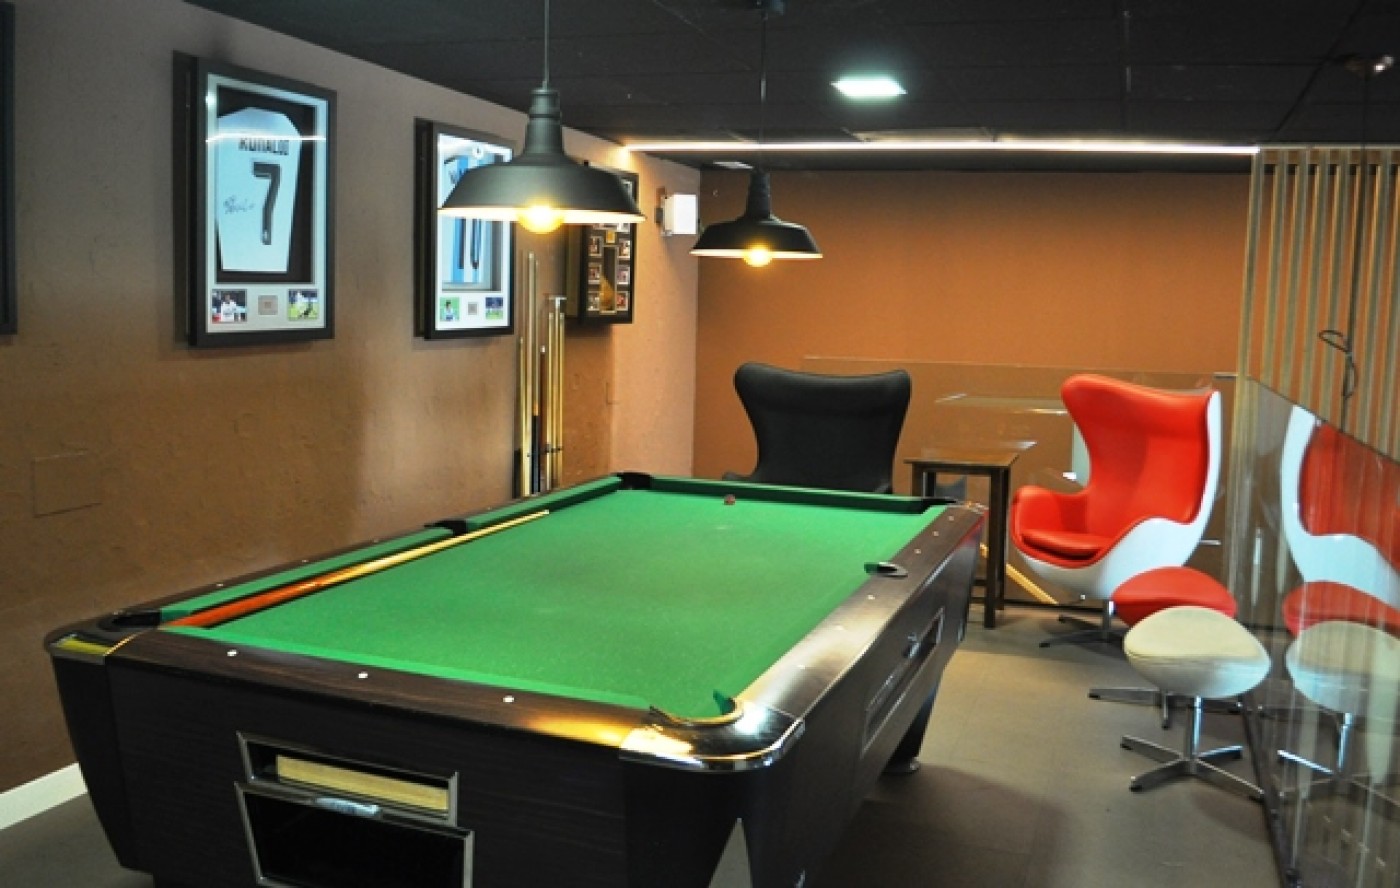 Bar 62 Corvera: eat, drink and relax with live entertainment and sports coverage at this family bar in Corvera